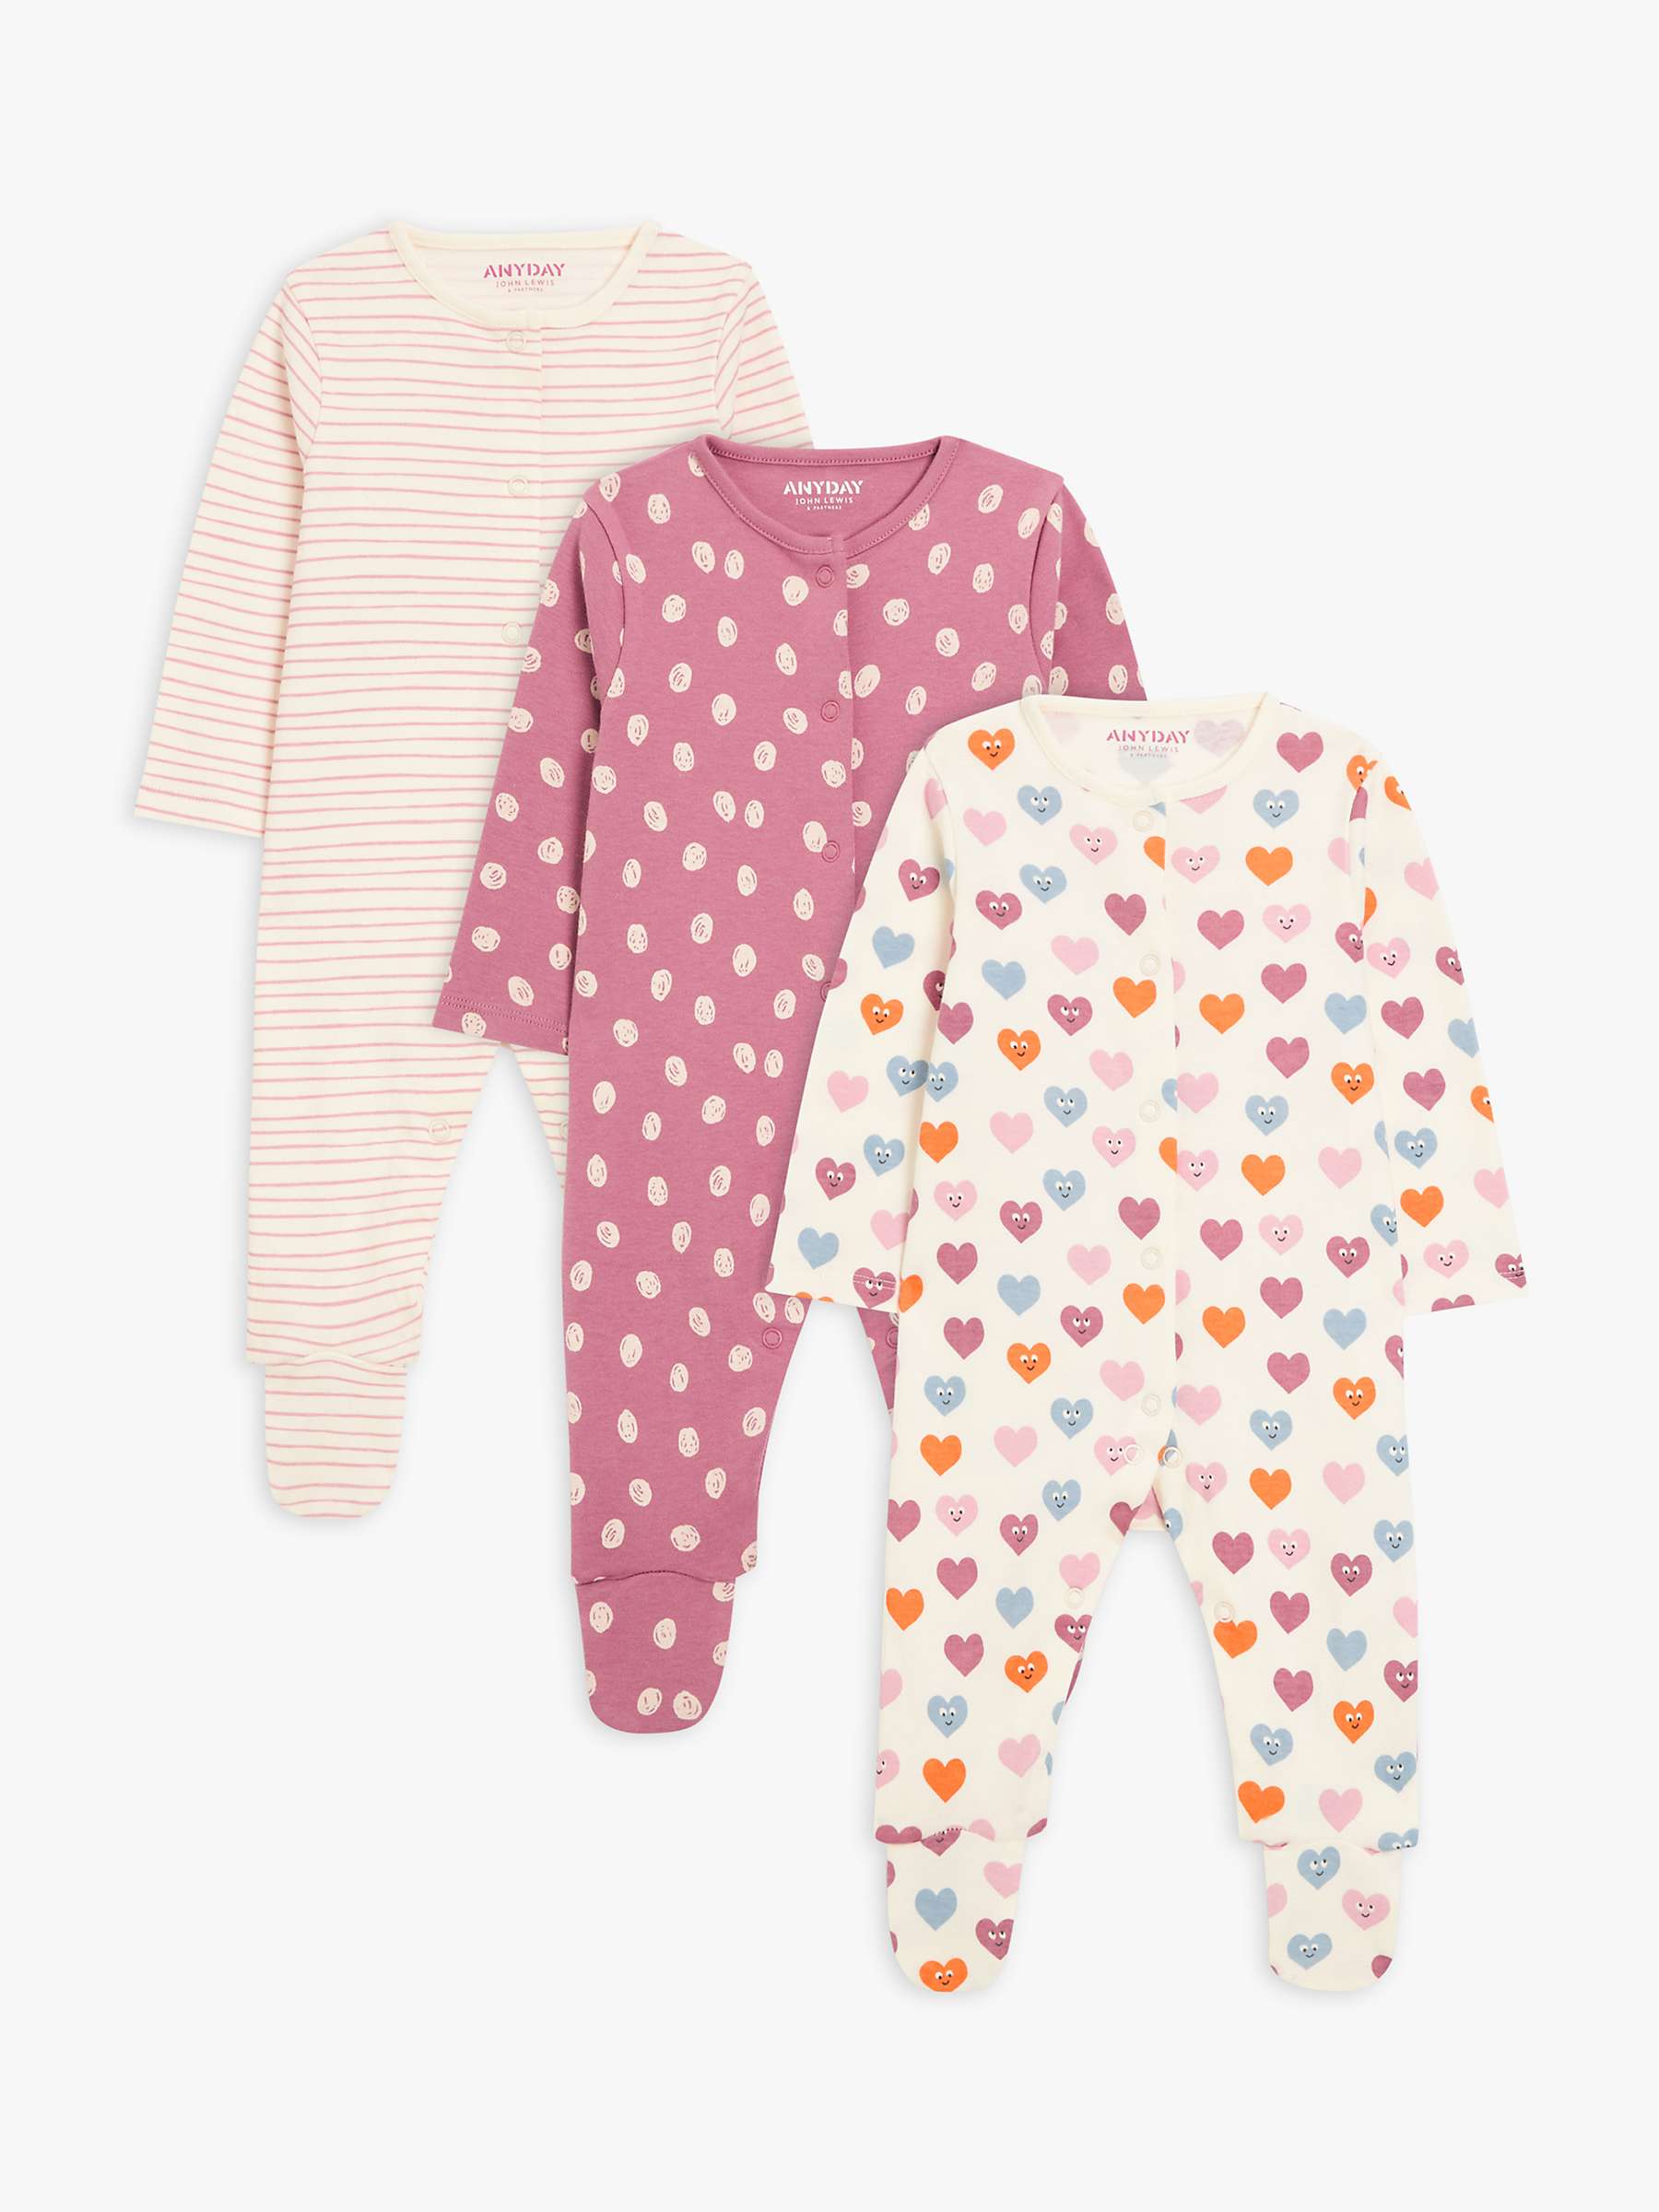 Buy John Lewis ANYDAY Baby Heart Mix Sleepsuit, Pack of 3, Multi Online at johnlewis.com